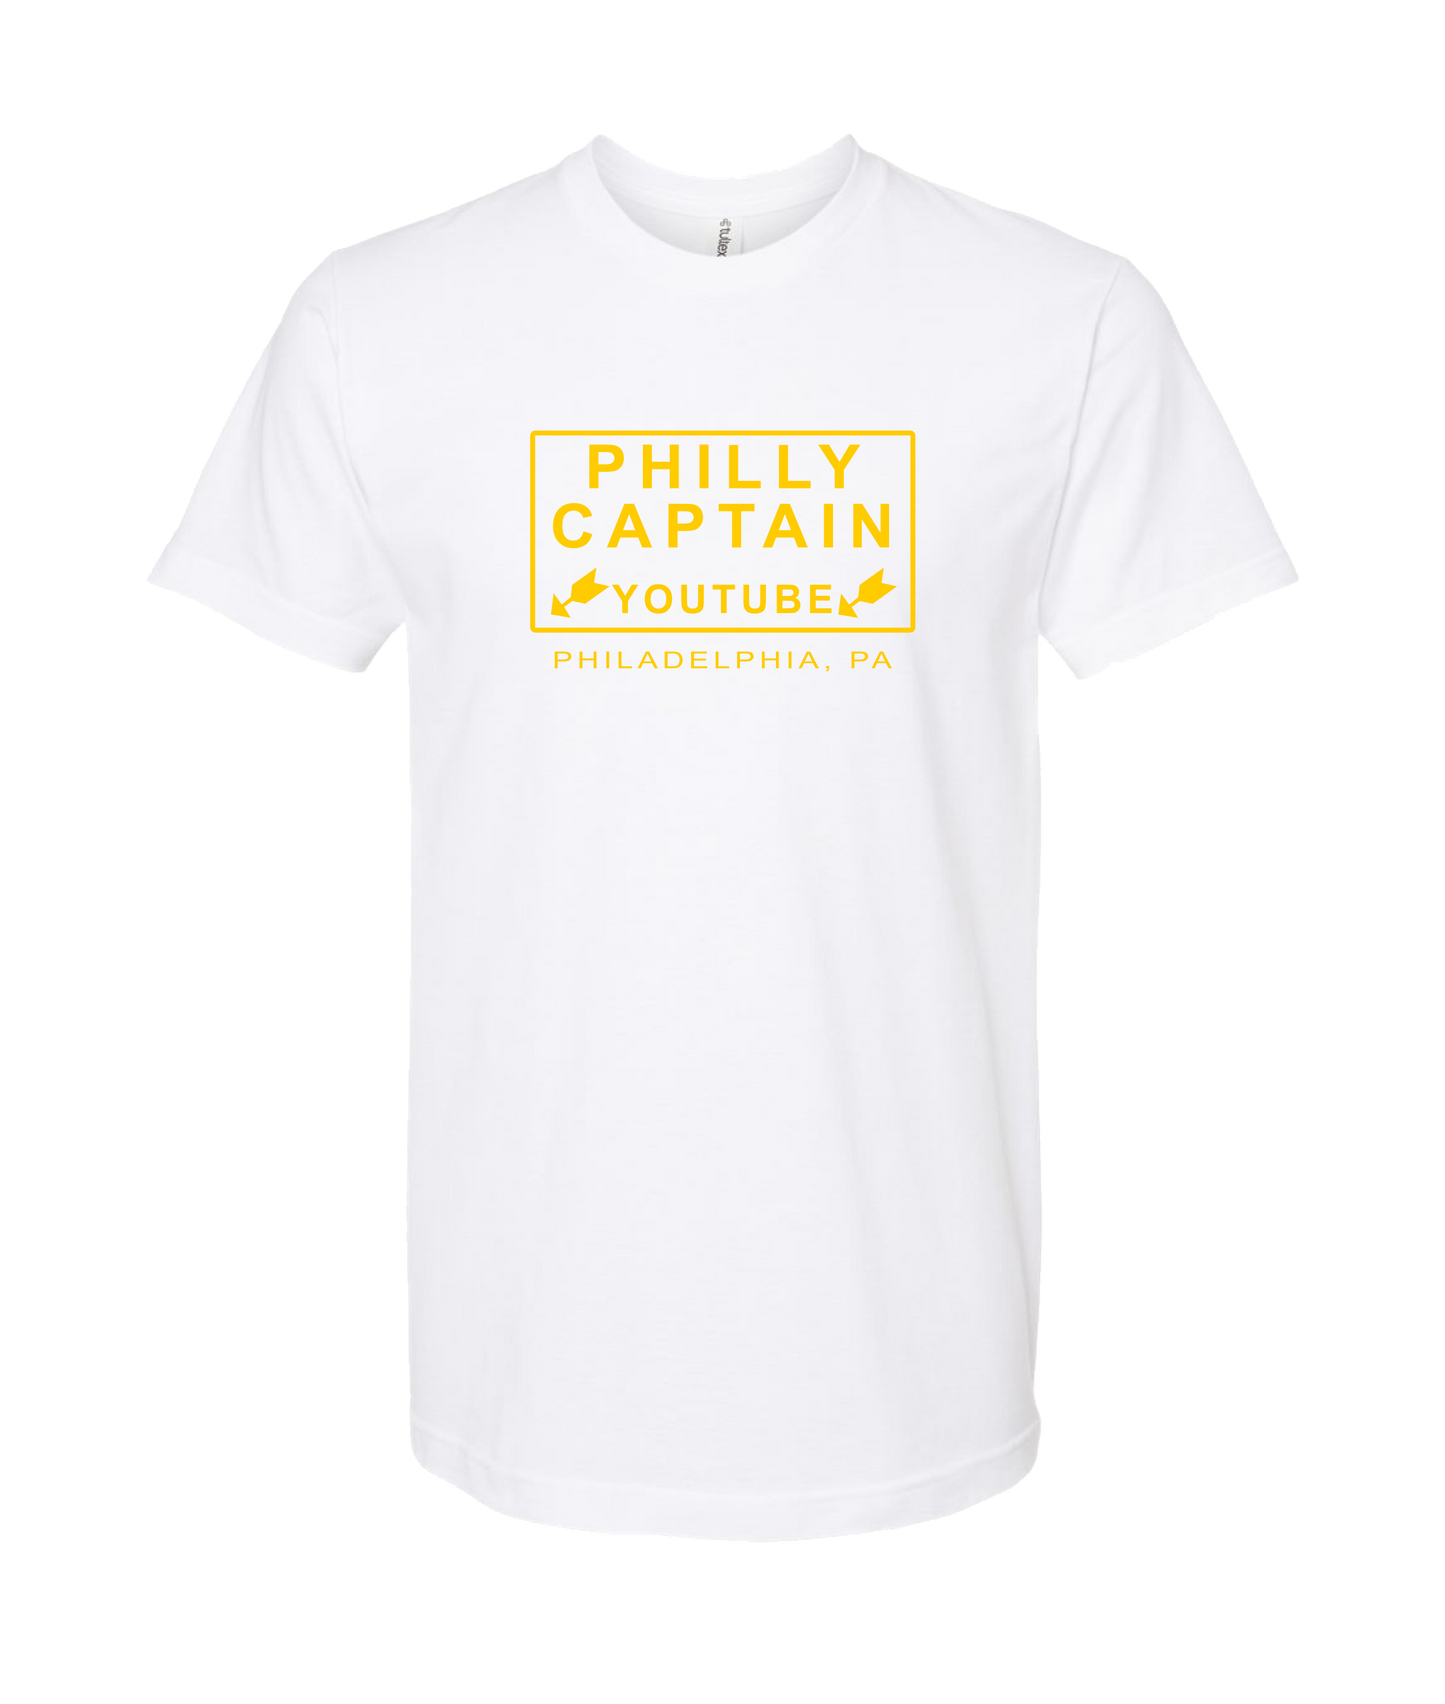 The Philly Captain's Merch is Fire - YouTube - White T-Shirt